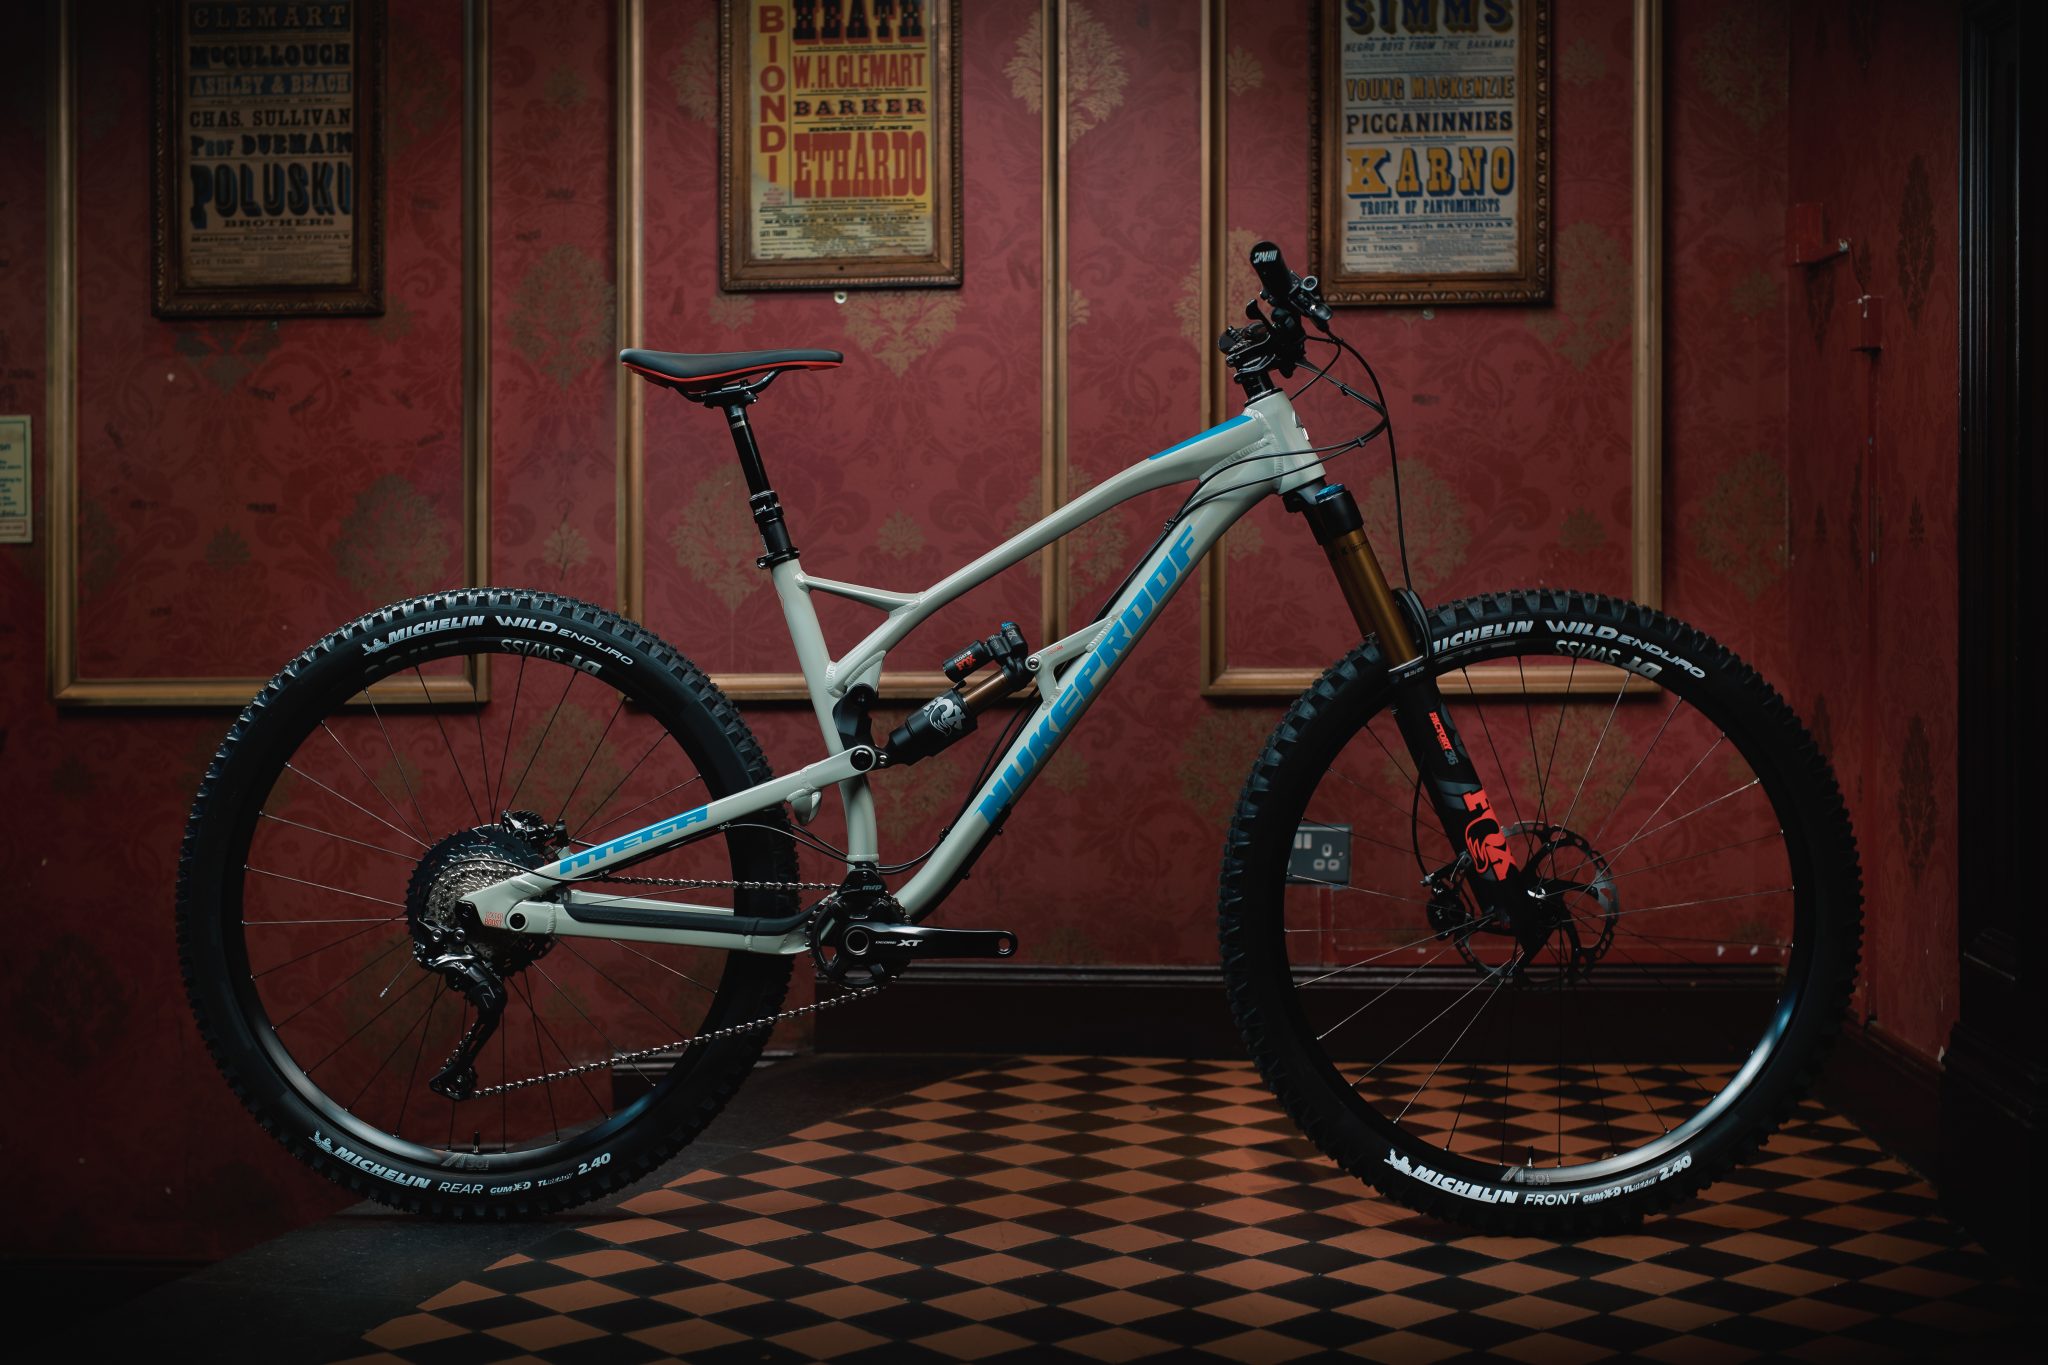 2019 nukeproof scout